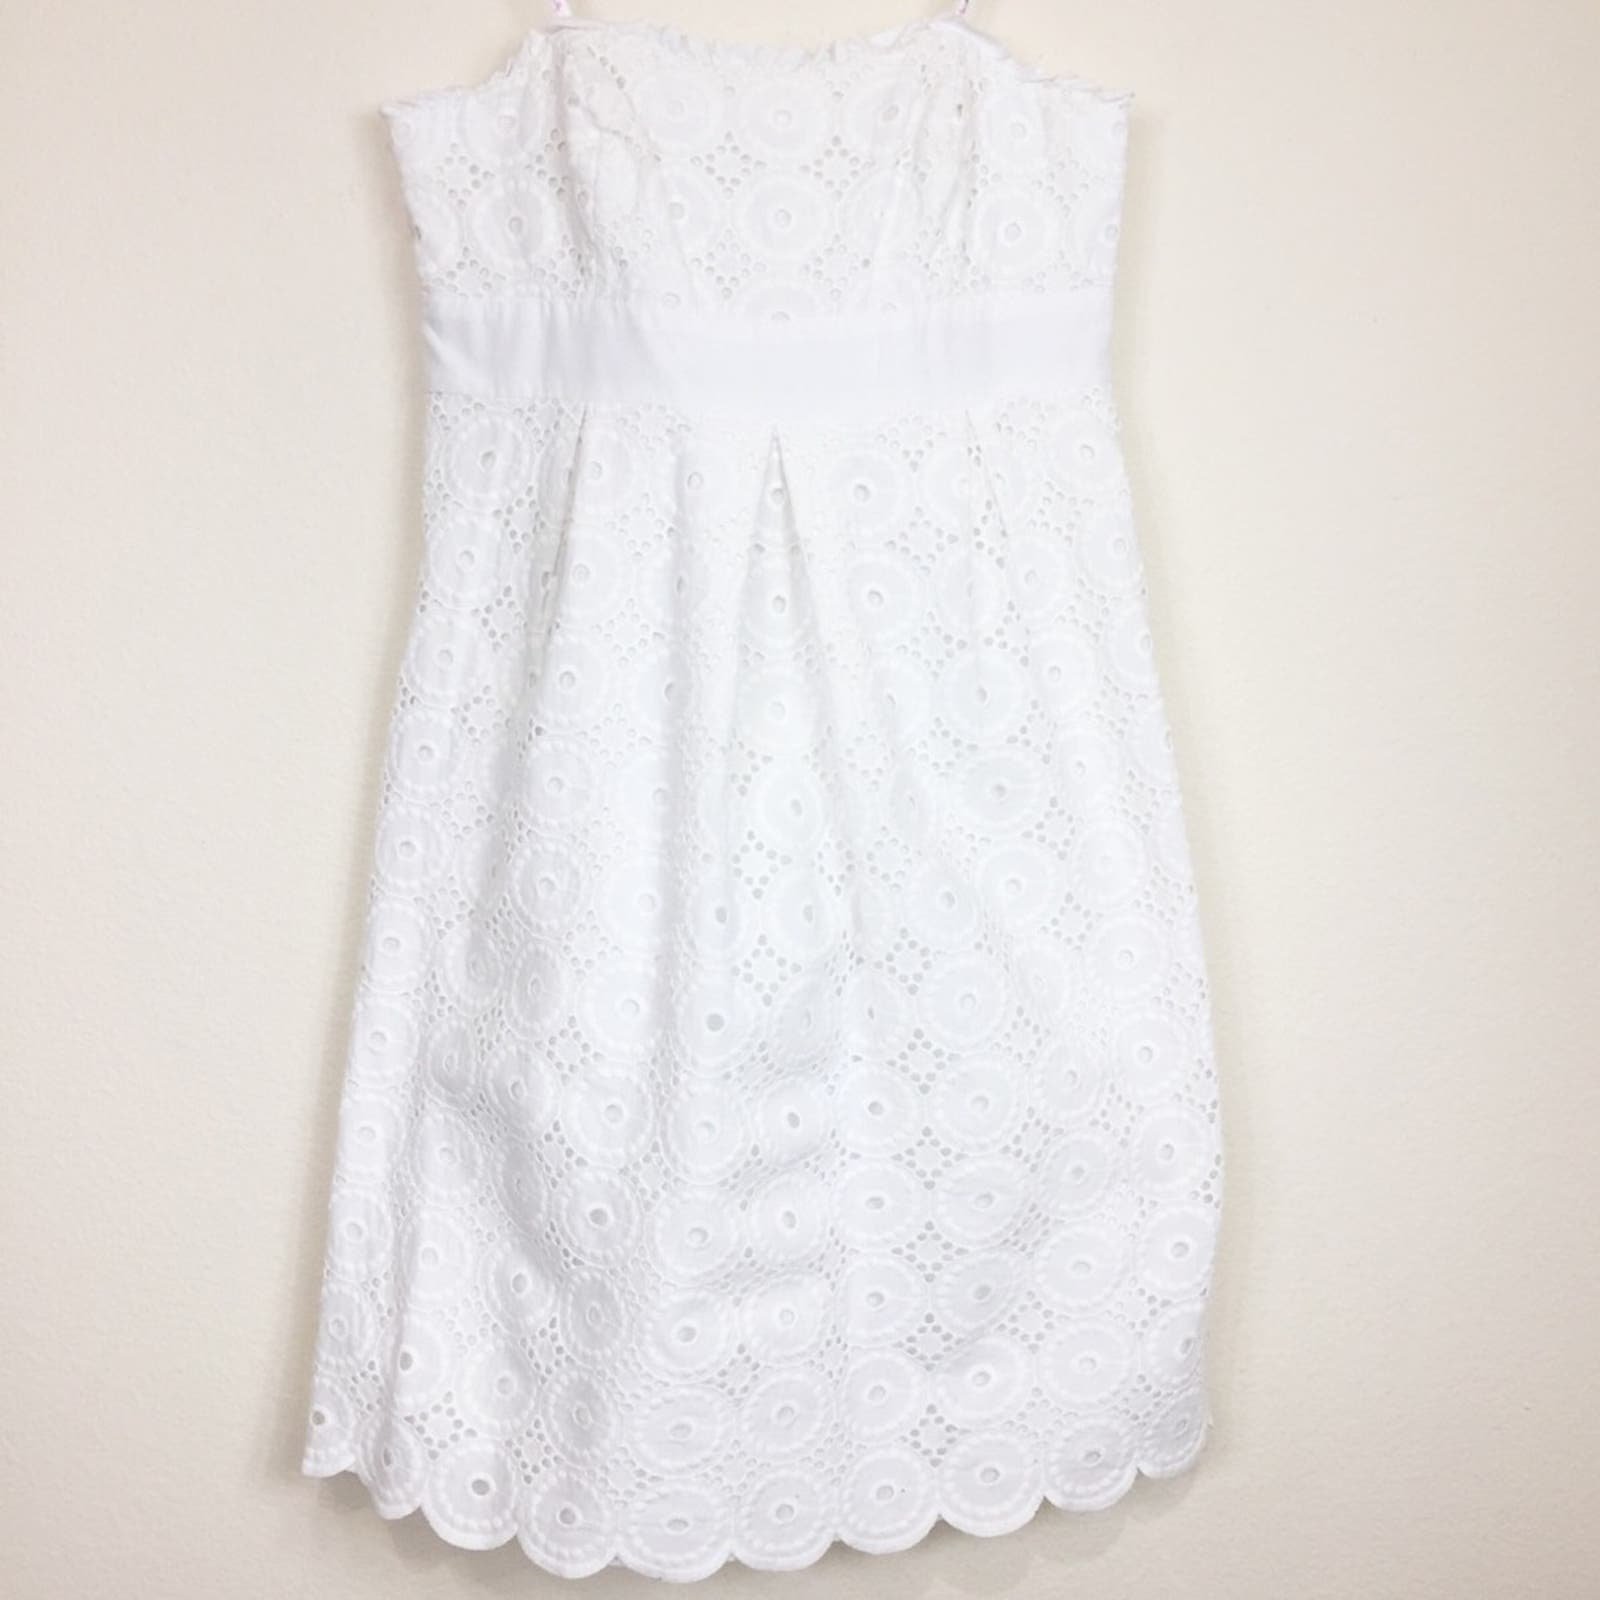 Great Lilly Pulitzer Strapless Eyelet Dress K605dP4bS well sale